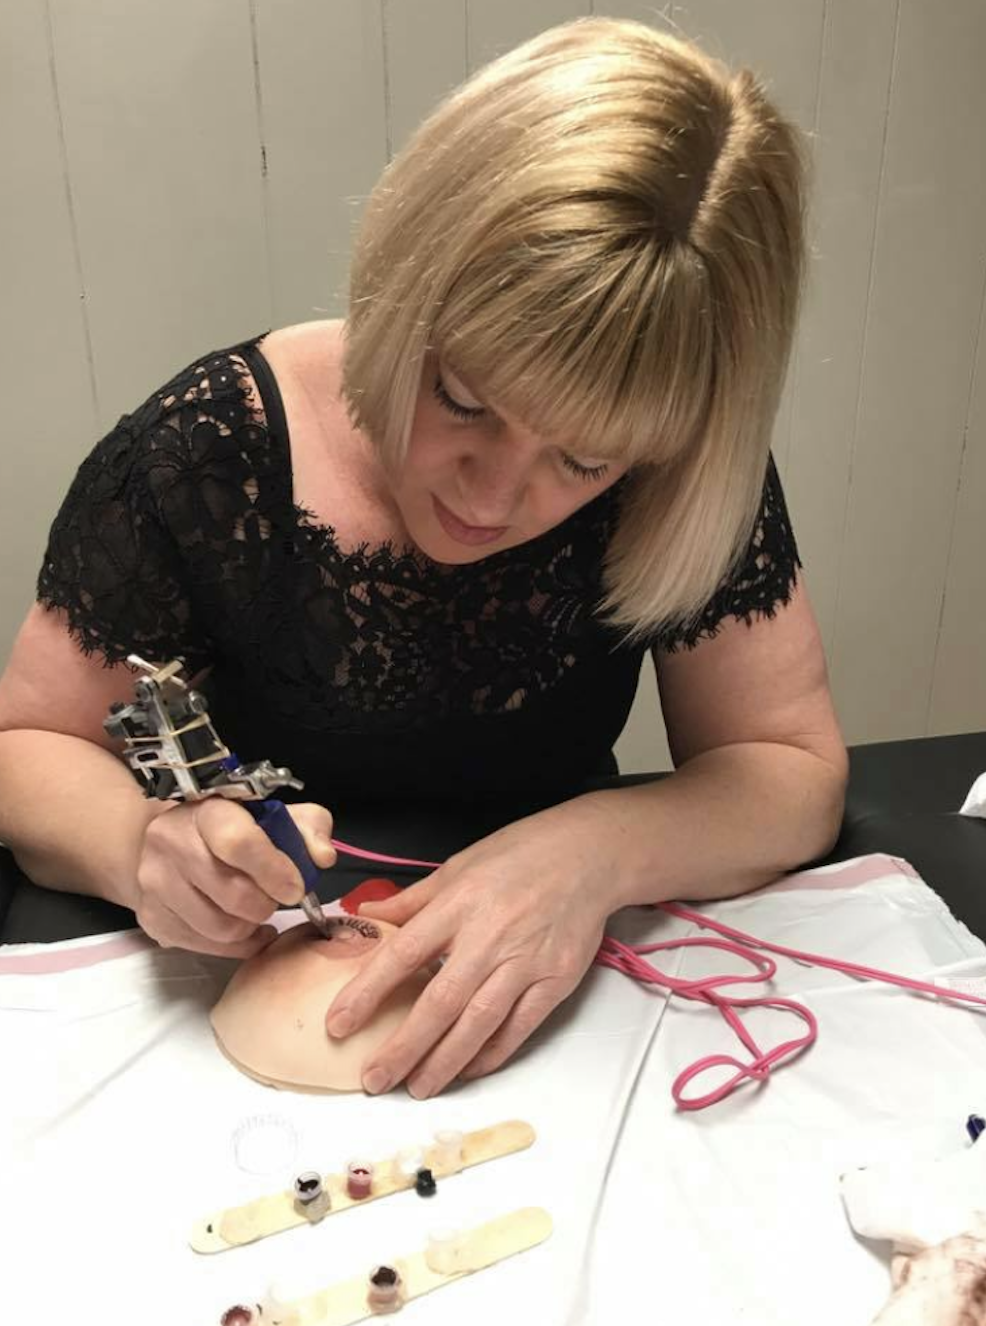 Vicky Martin 2017 Arkansas training day student tattooing on one of Vicky's VMM® life-like realistic breast moulds